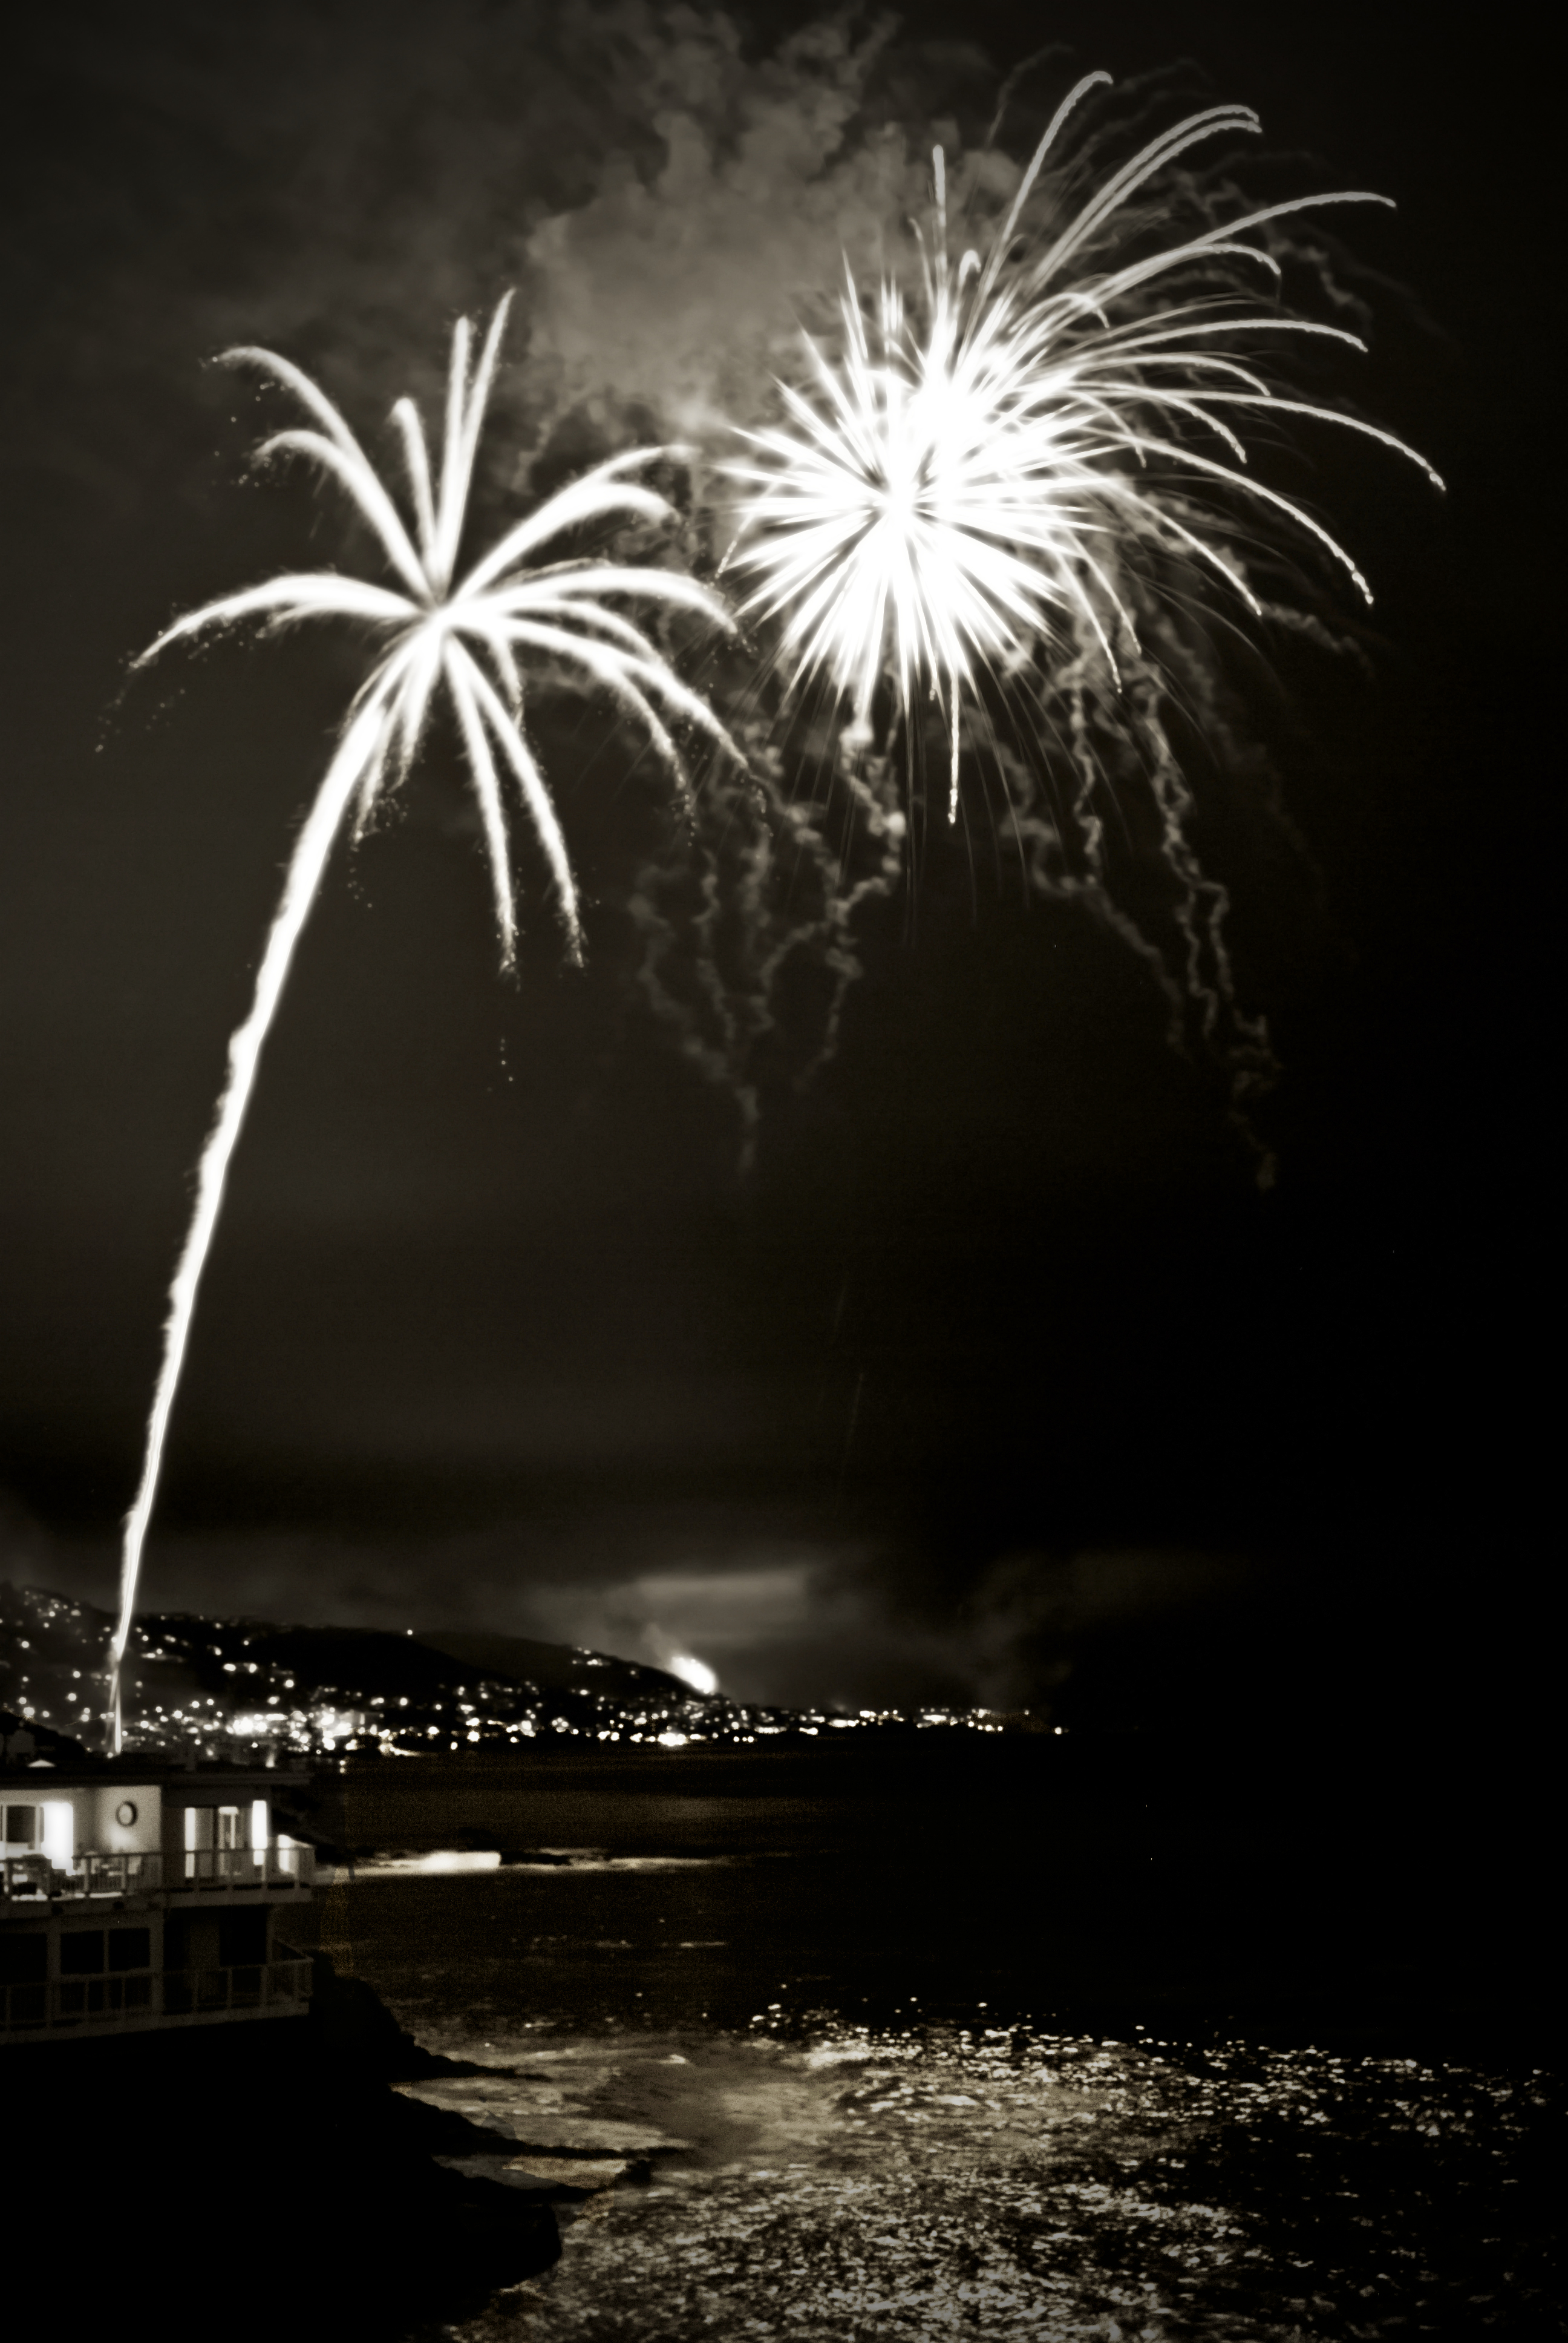 A Fireworks Tree Looming over the Beach | My Camera Journal